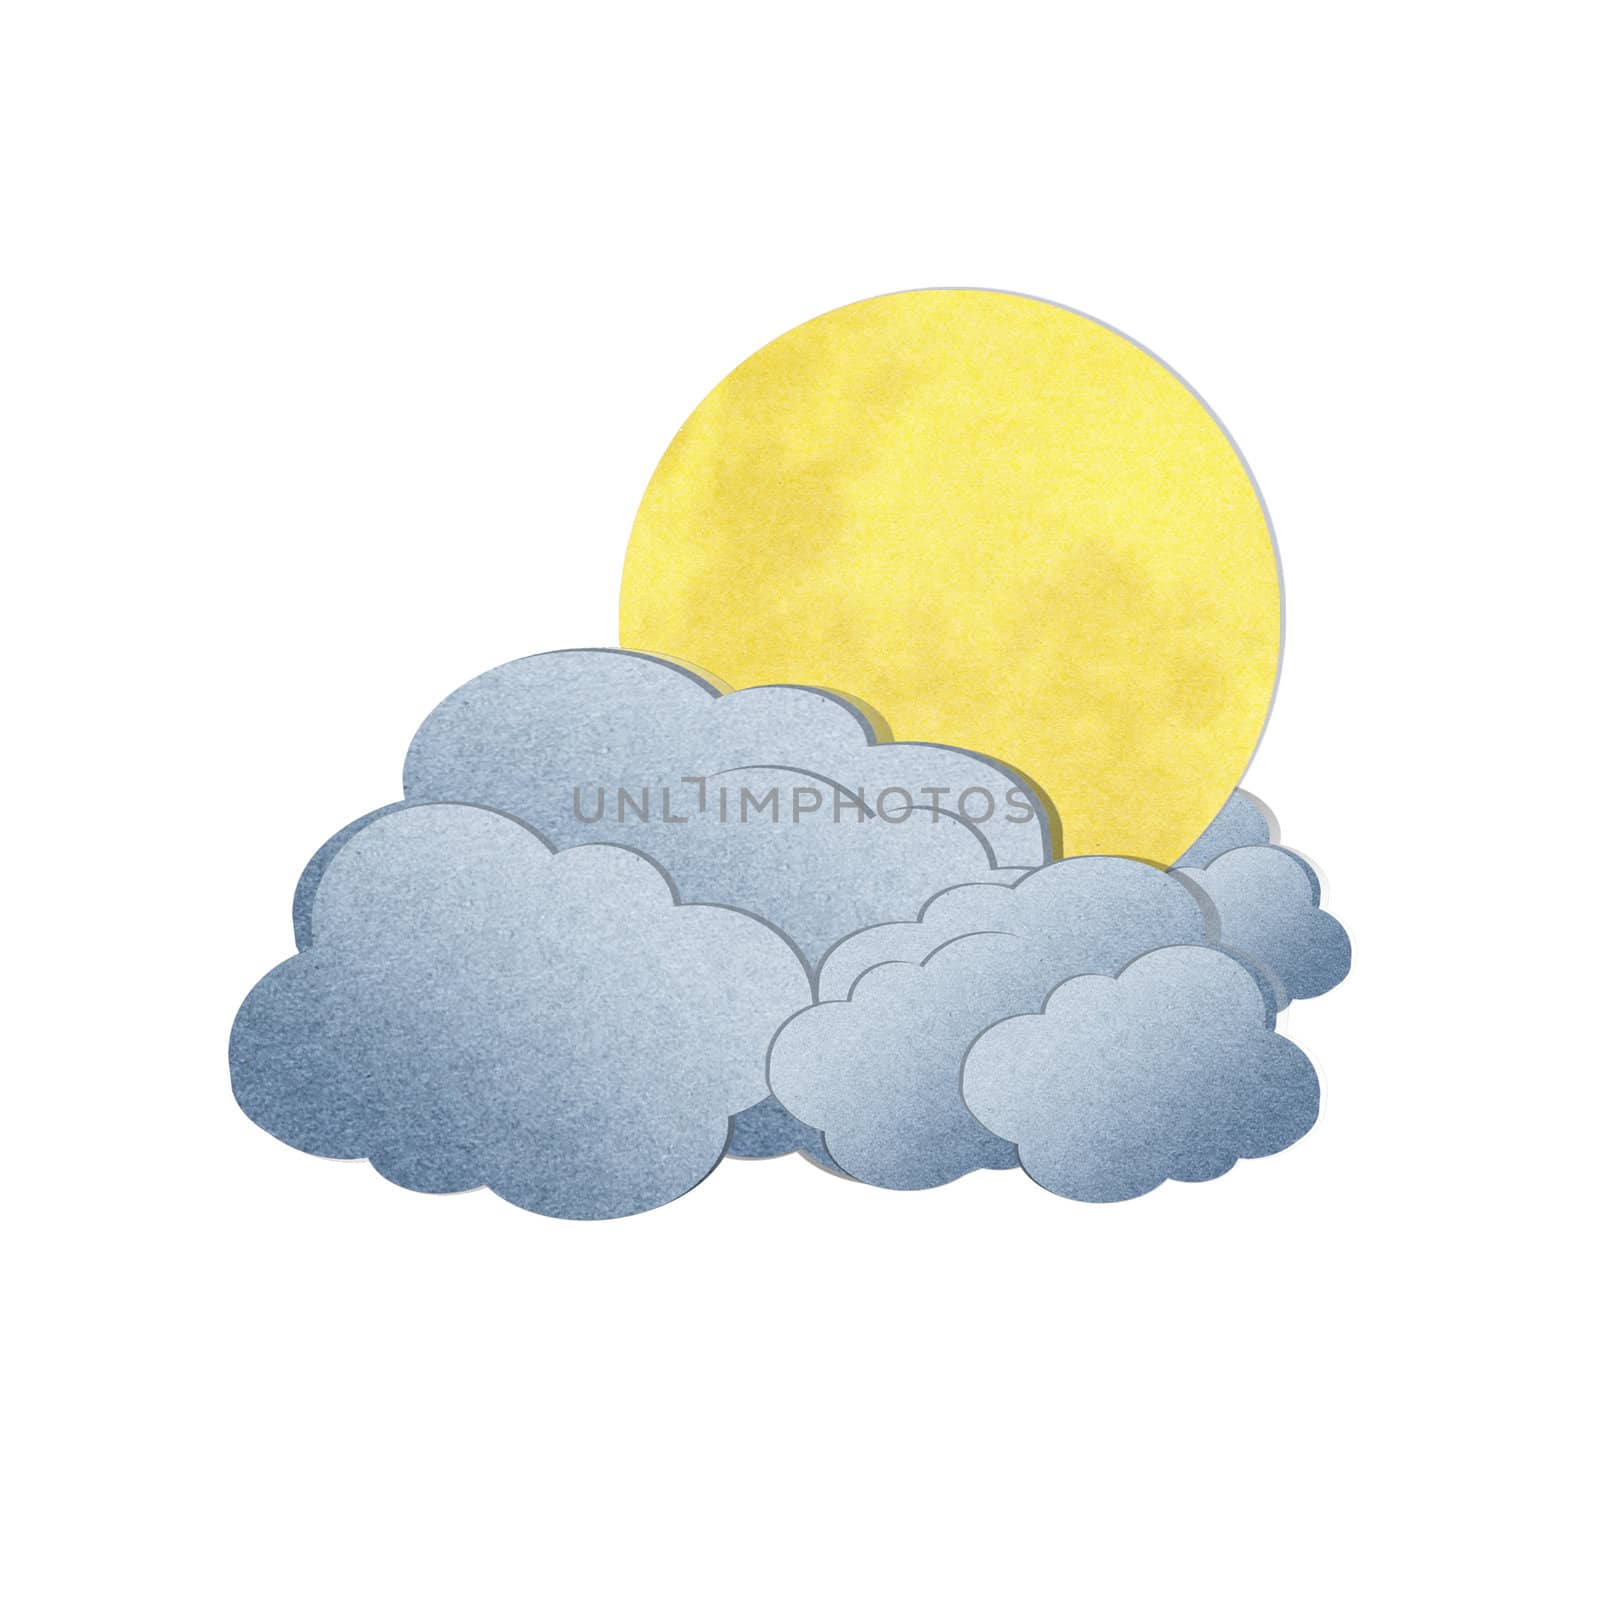  Grunge recycled paper moon and cloud on white background